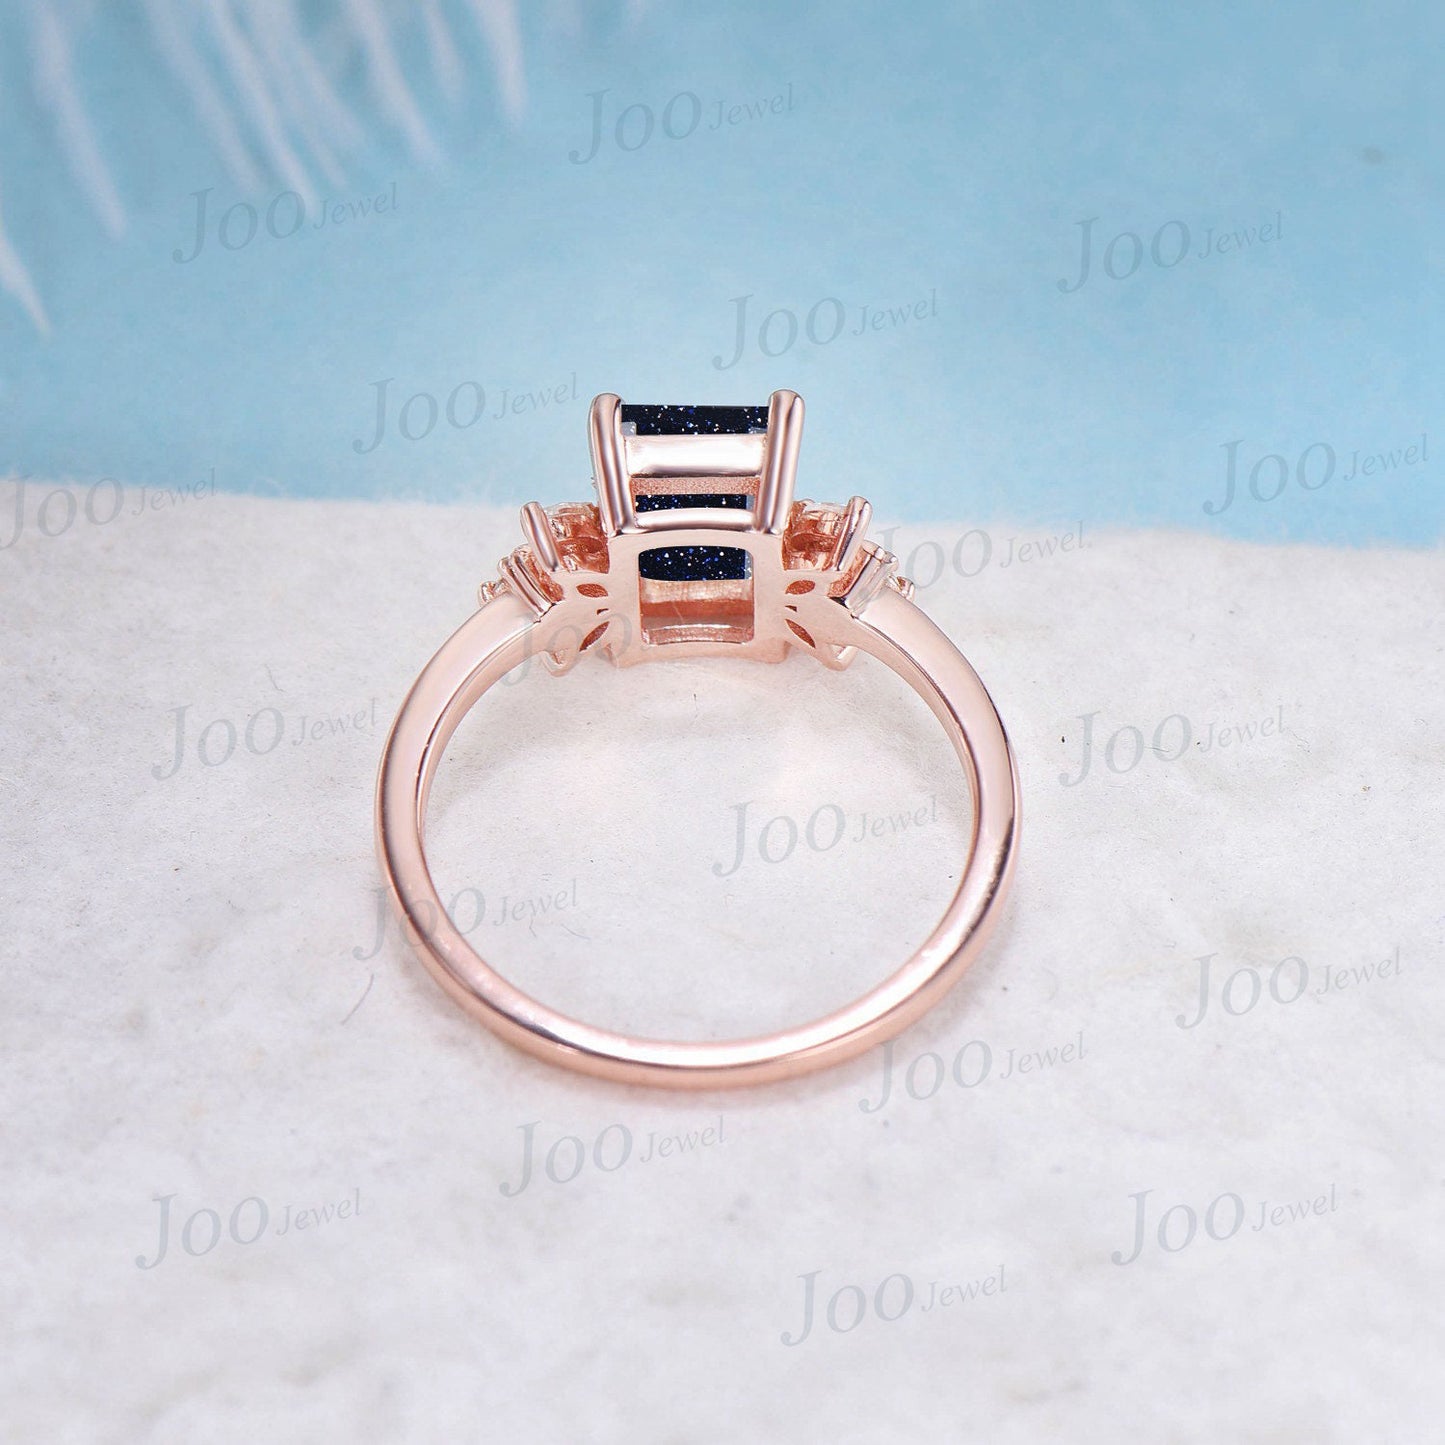 2ct Emerald Cut Galaxy Blue Sandstone Engagement Ring Blue Gemstone Jewelry Vintage Cluster Kite Alexandrite Ring Personalized Gift Women